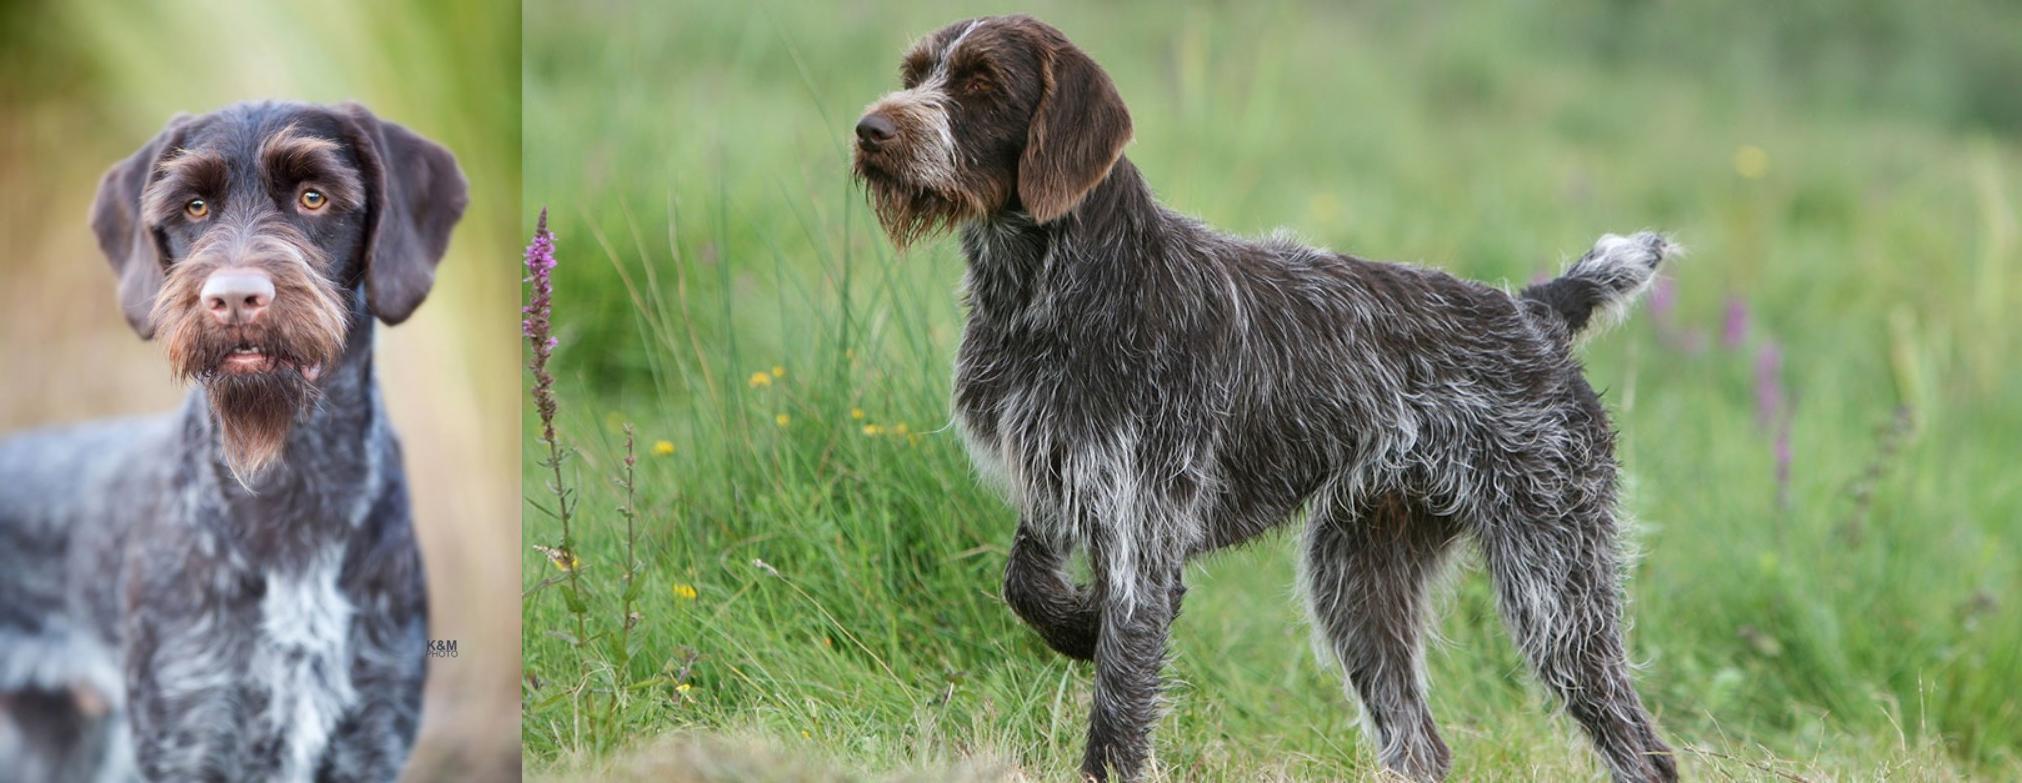 German Wirehaired Pointer Vs Cesky Fousek Breed Comparison